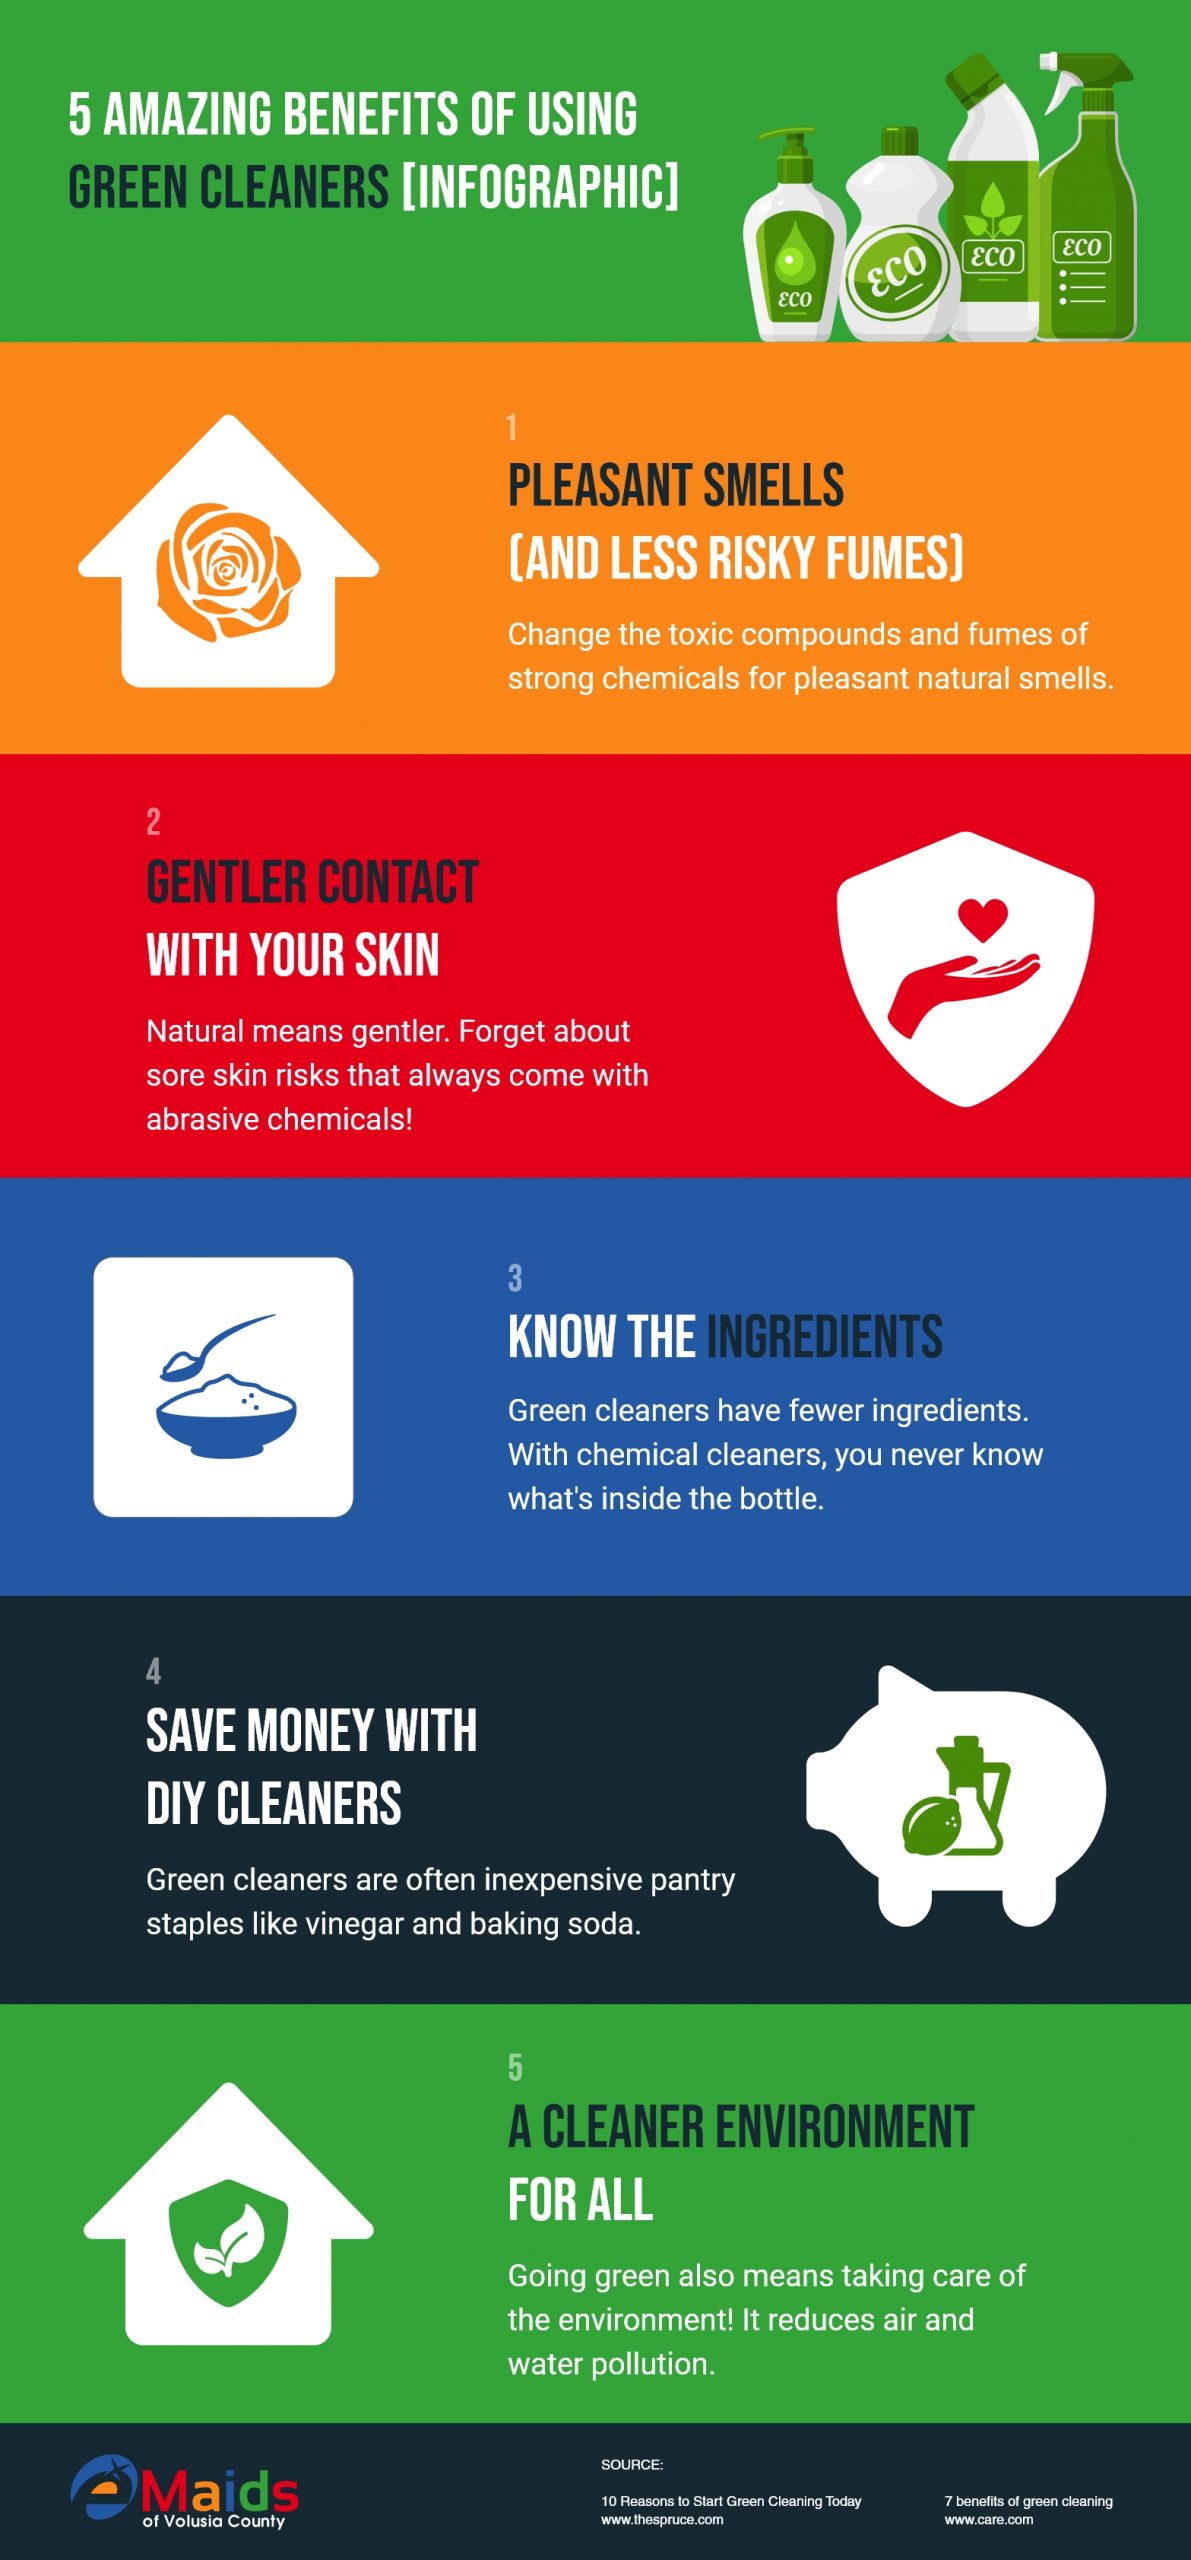 eMaids of Volusia County 5 Amazing Benefits Of Using Green Cleaners [Infographic]